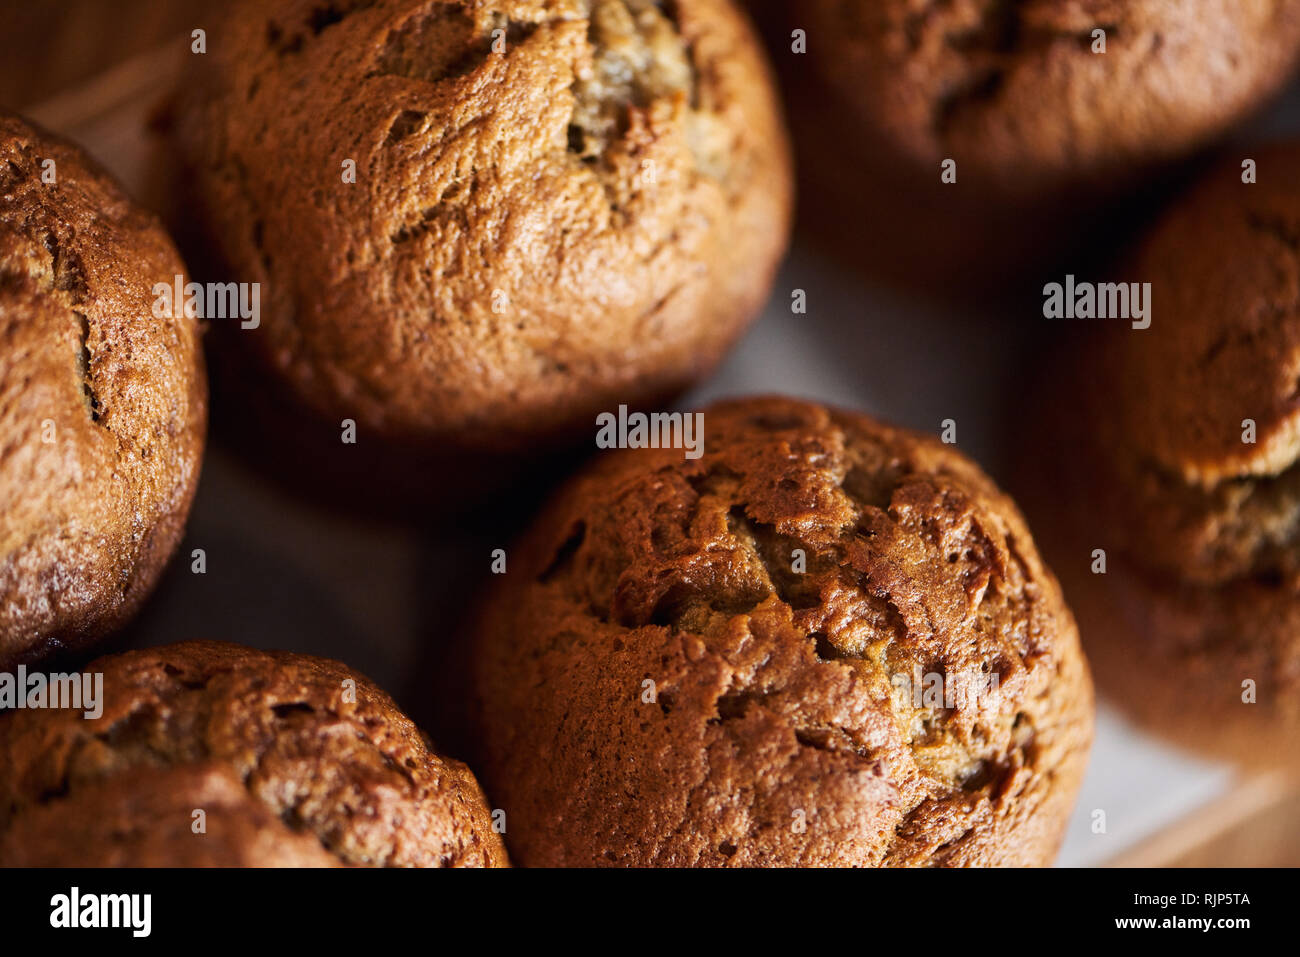 Closeup of freshly baked muffins sitting on a table Stock Photo